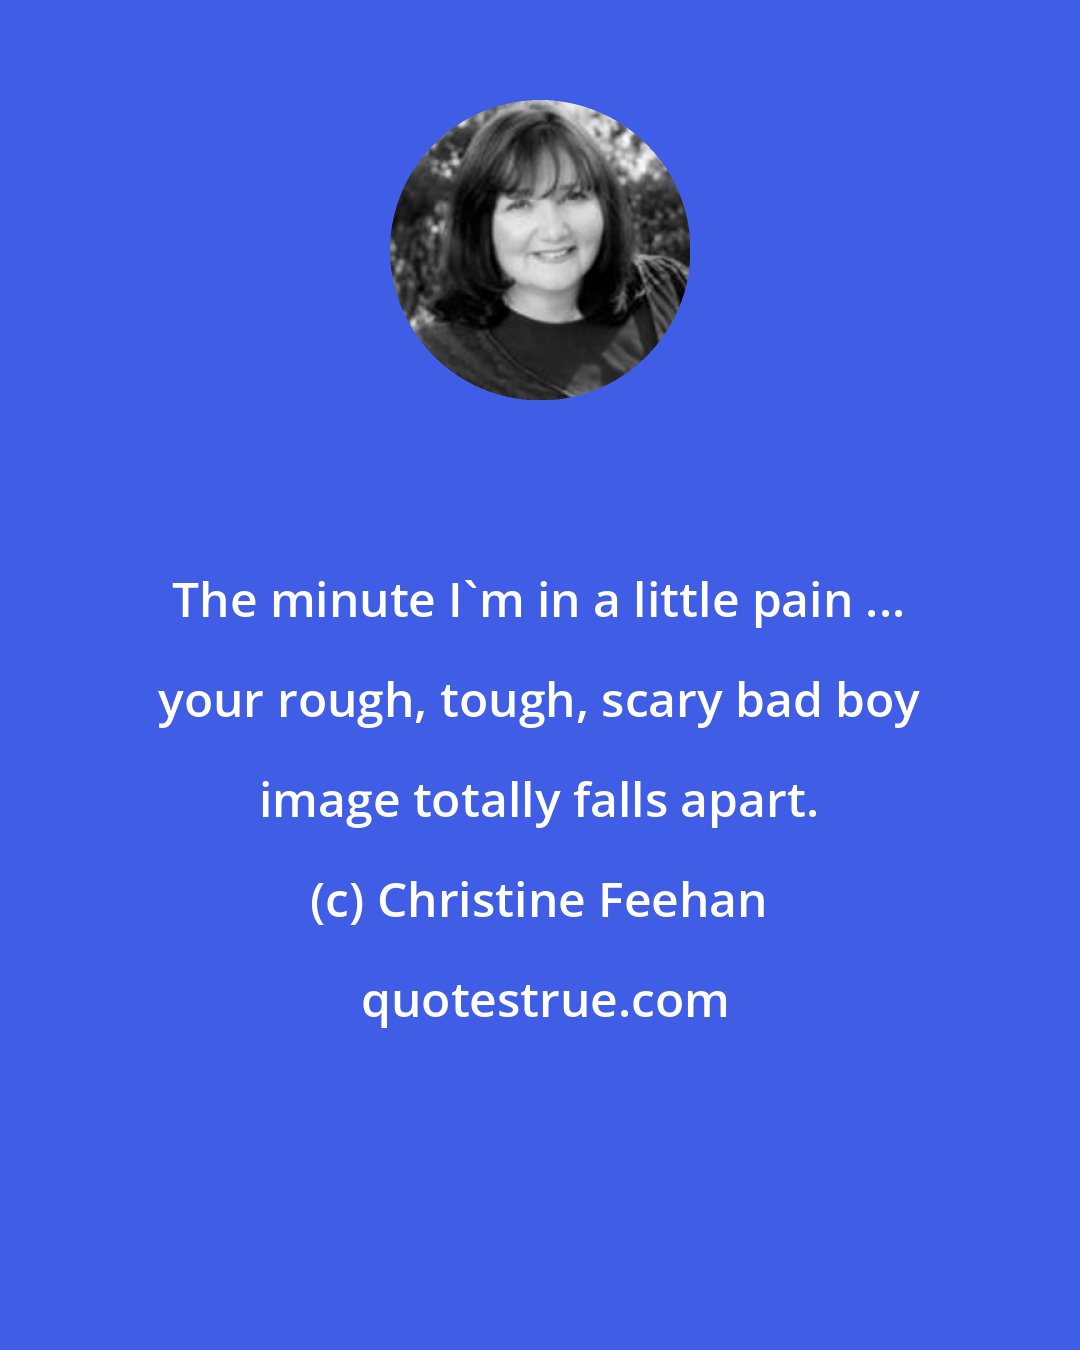 Christine Feehan: The minute I'm in a little pain ... your rough, tough, scary bad boy image totally falls apart.